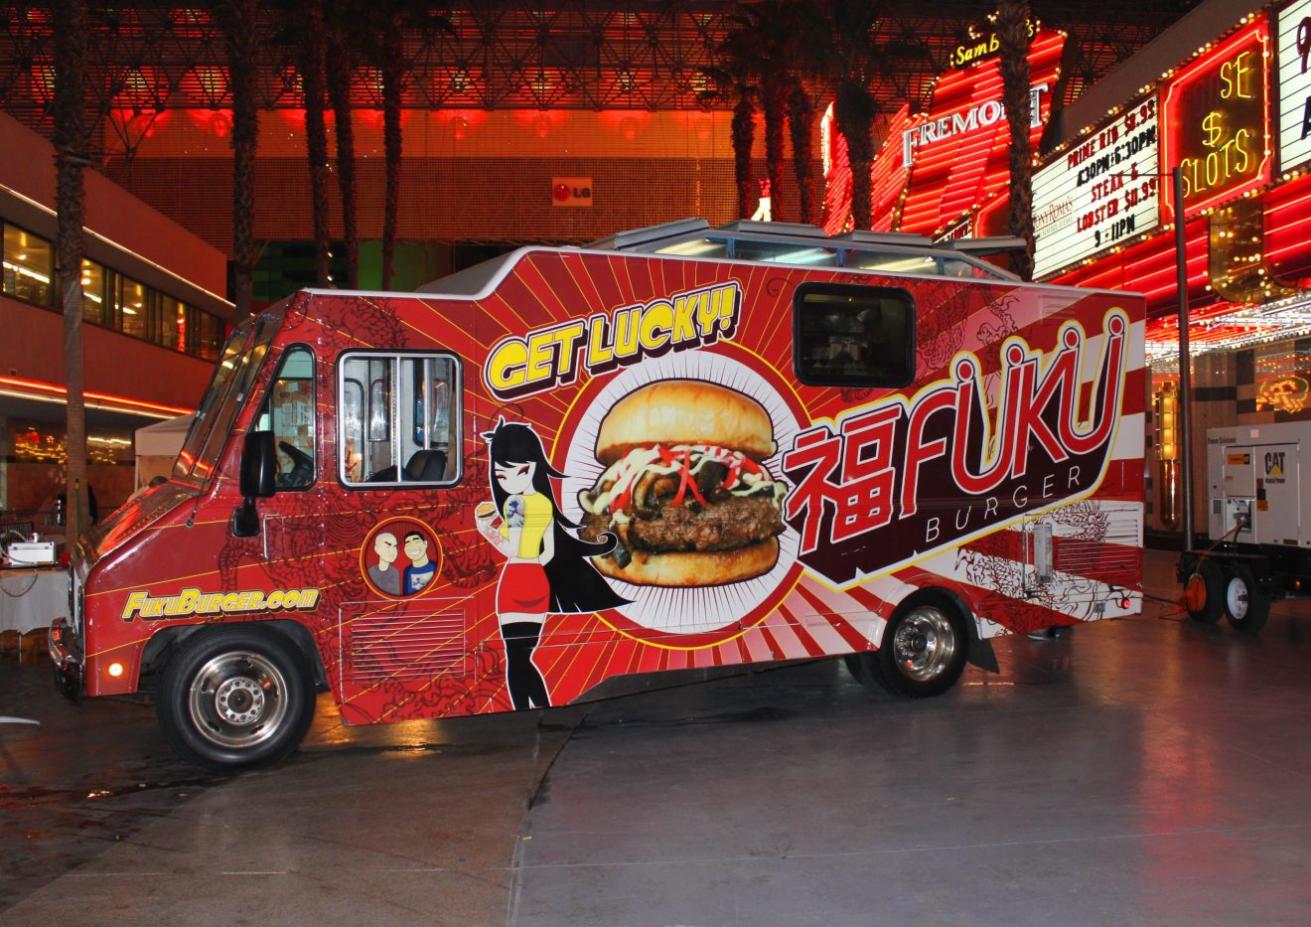 What Are the Legal and Regulatory Requirements That Catering Food Trucks Must Comply With?